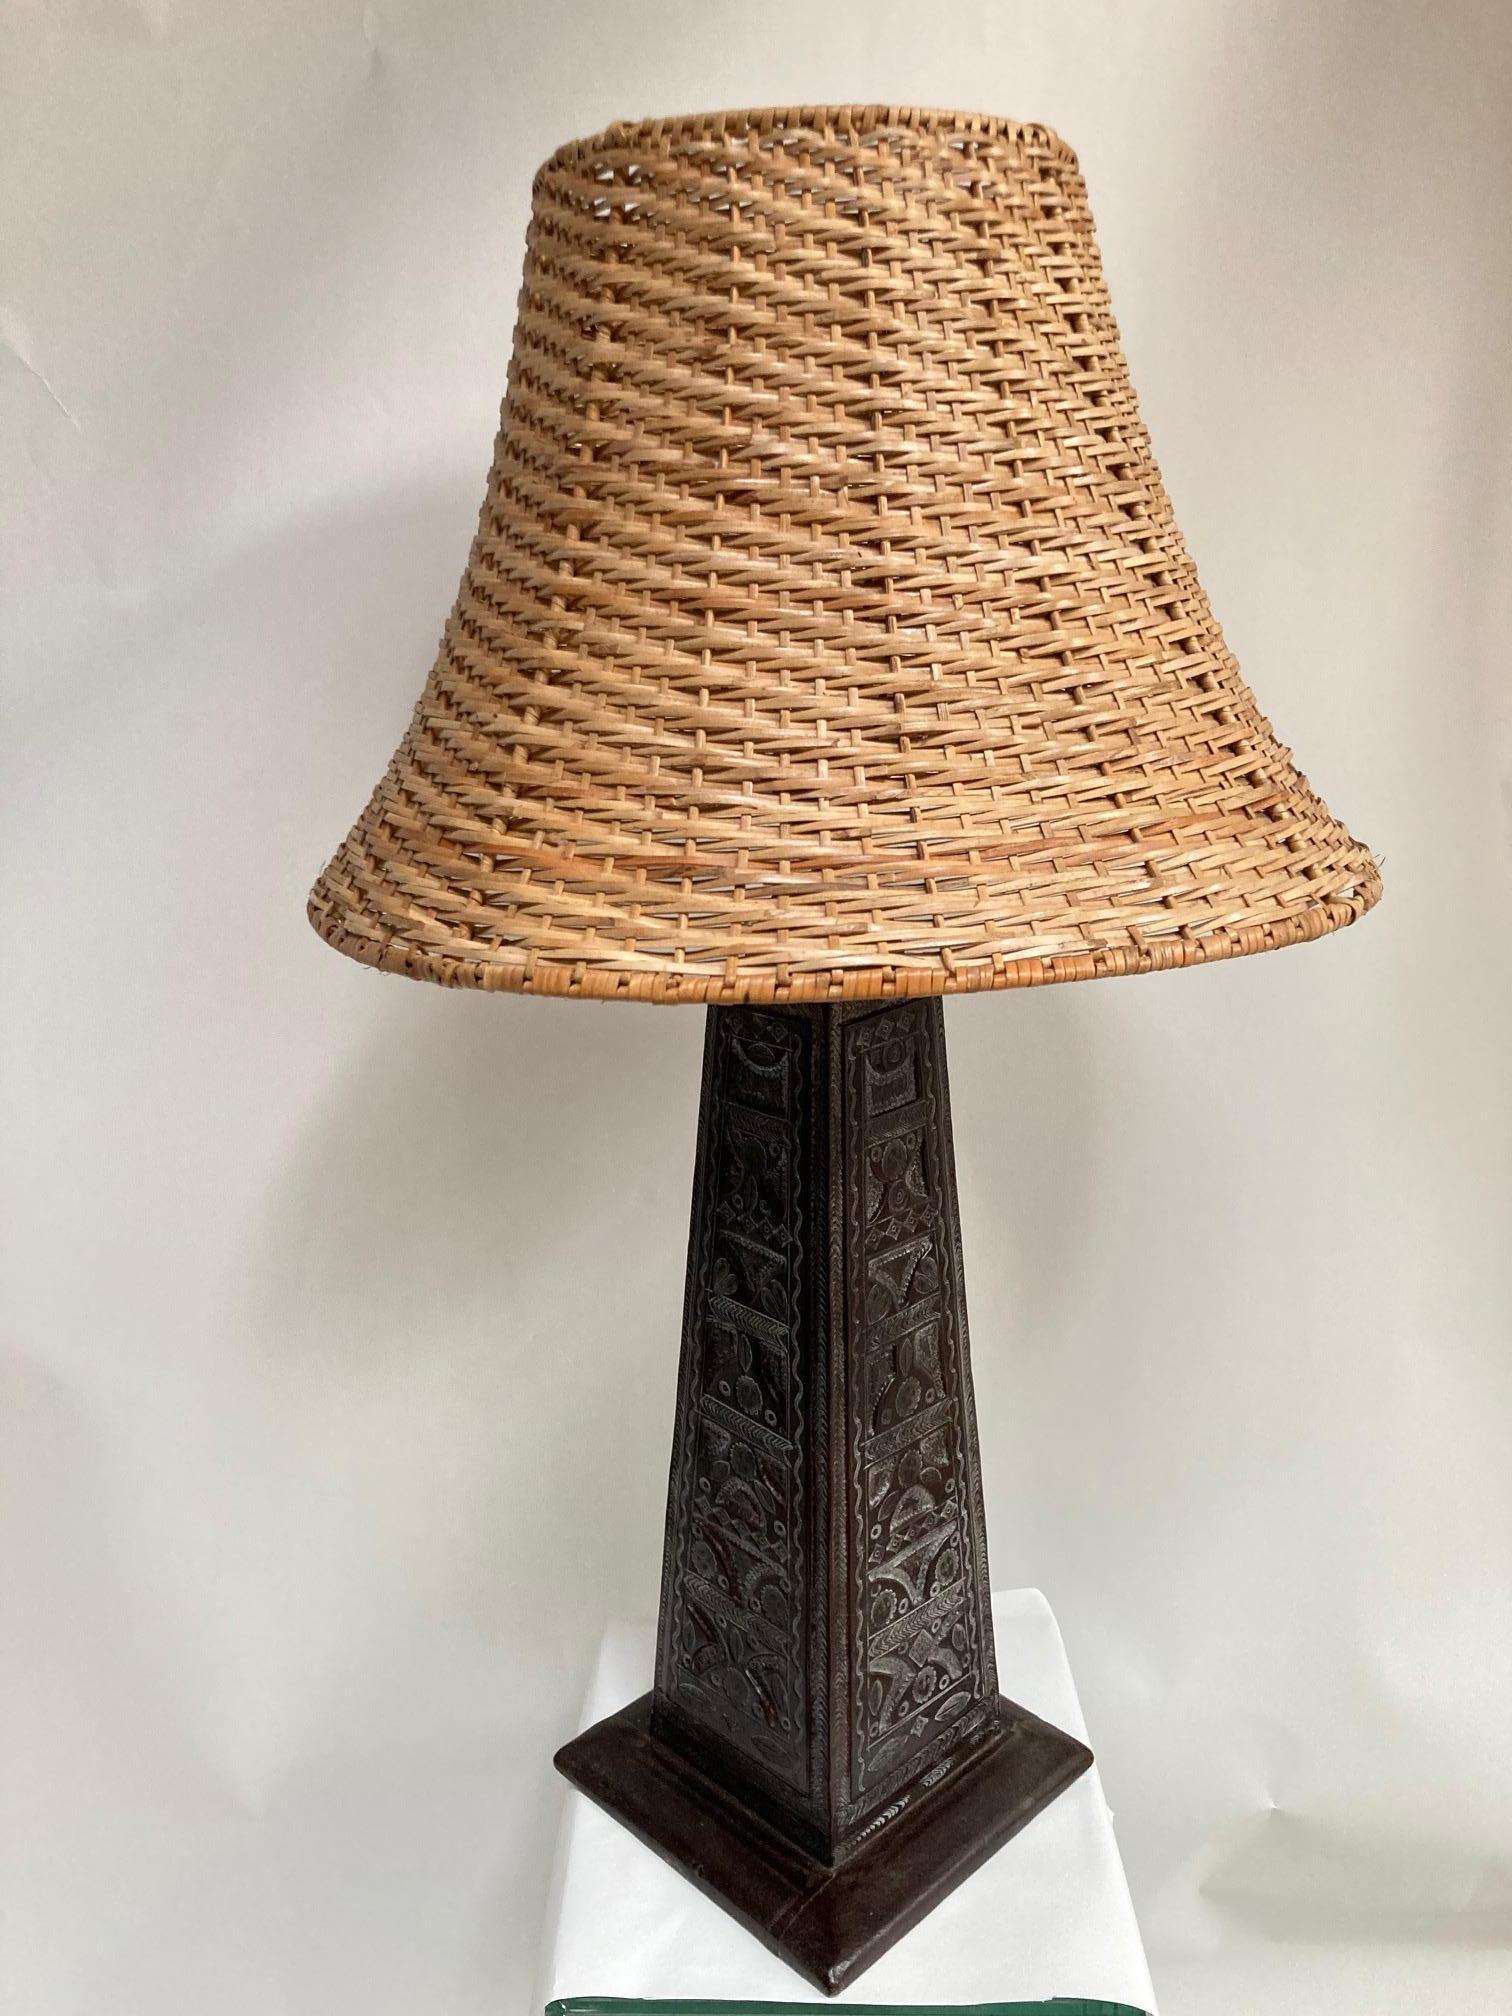 1970's carved leather lamp
Shade not included.